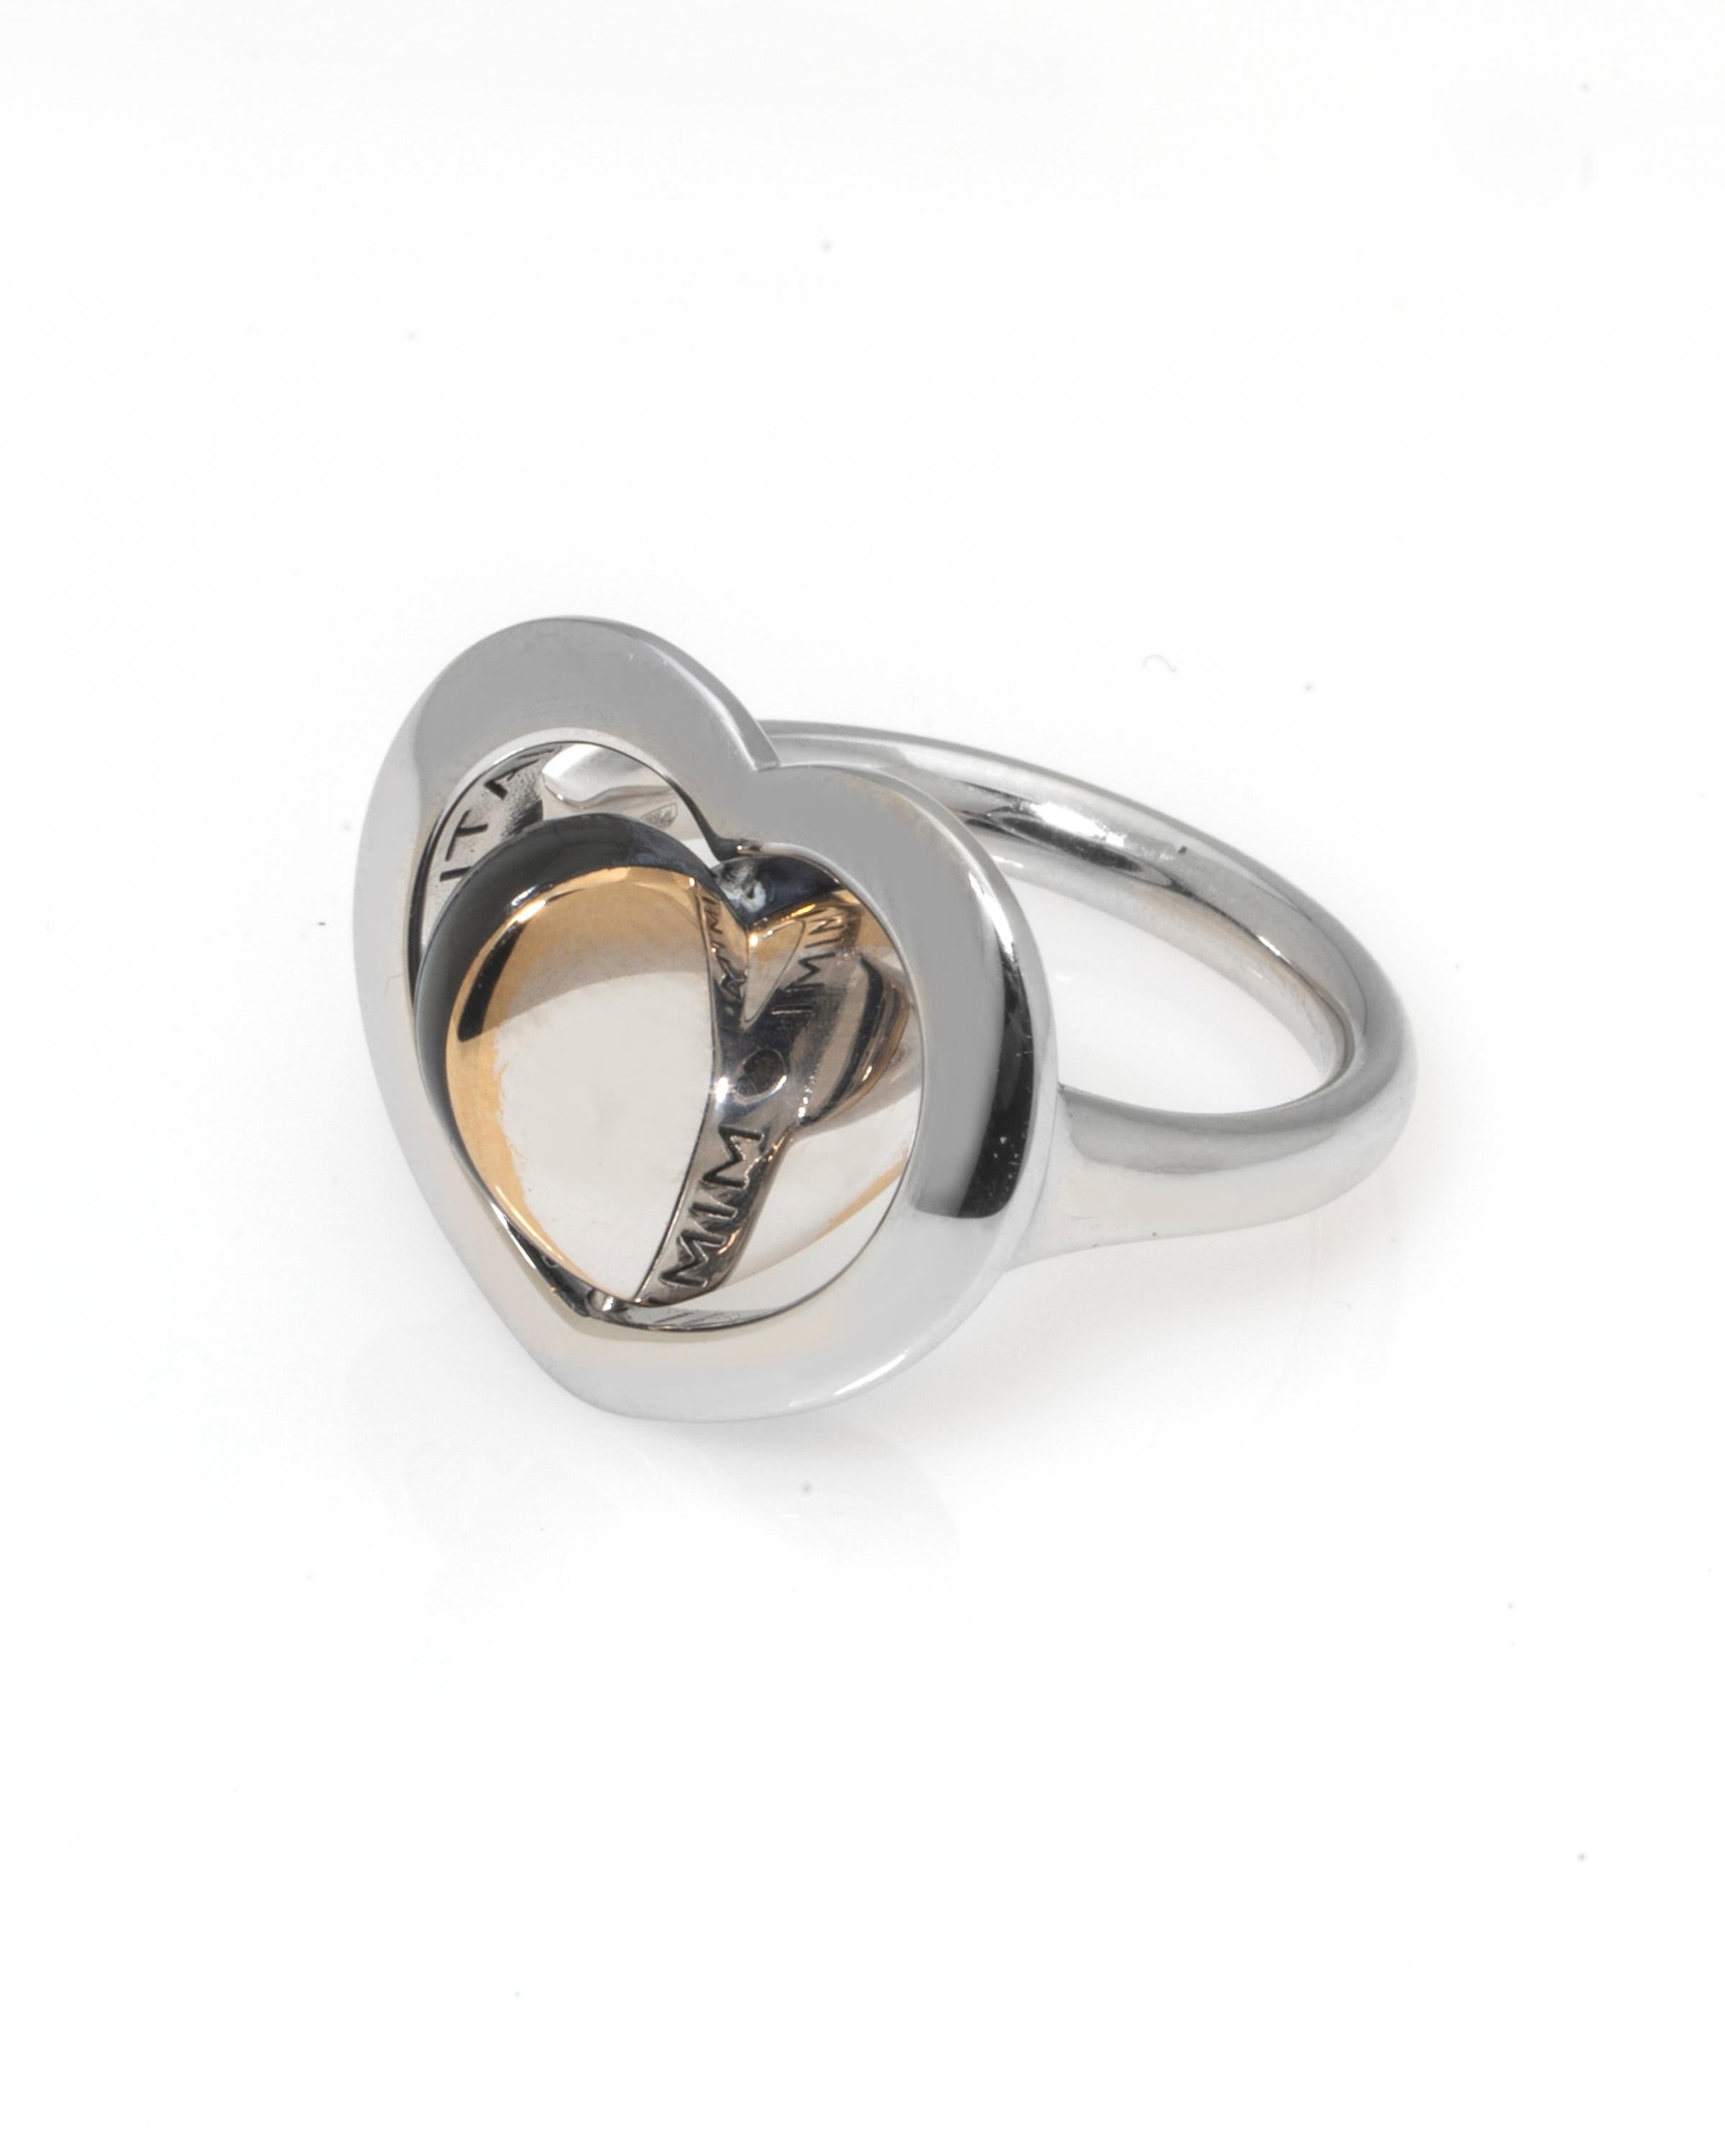 Contemporary Mimi Milano 18K White Gold, Onyx Cocktail Ring sz 6.5 For Sale